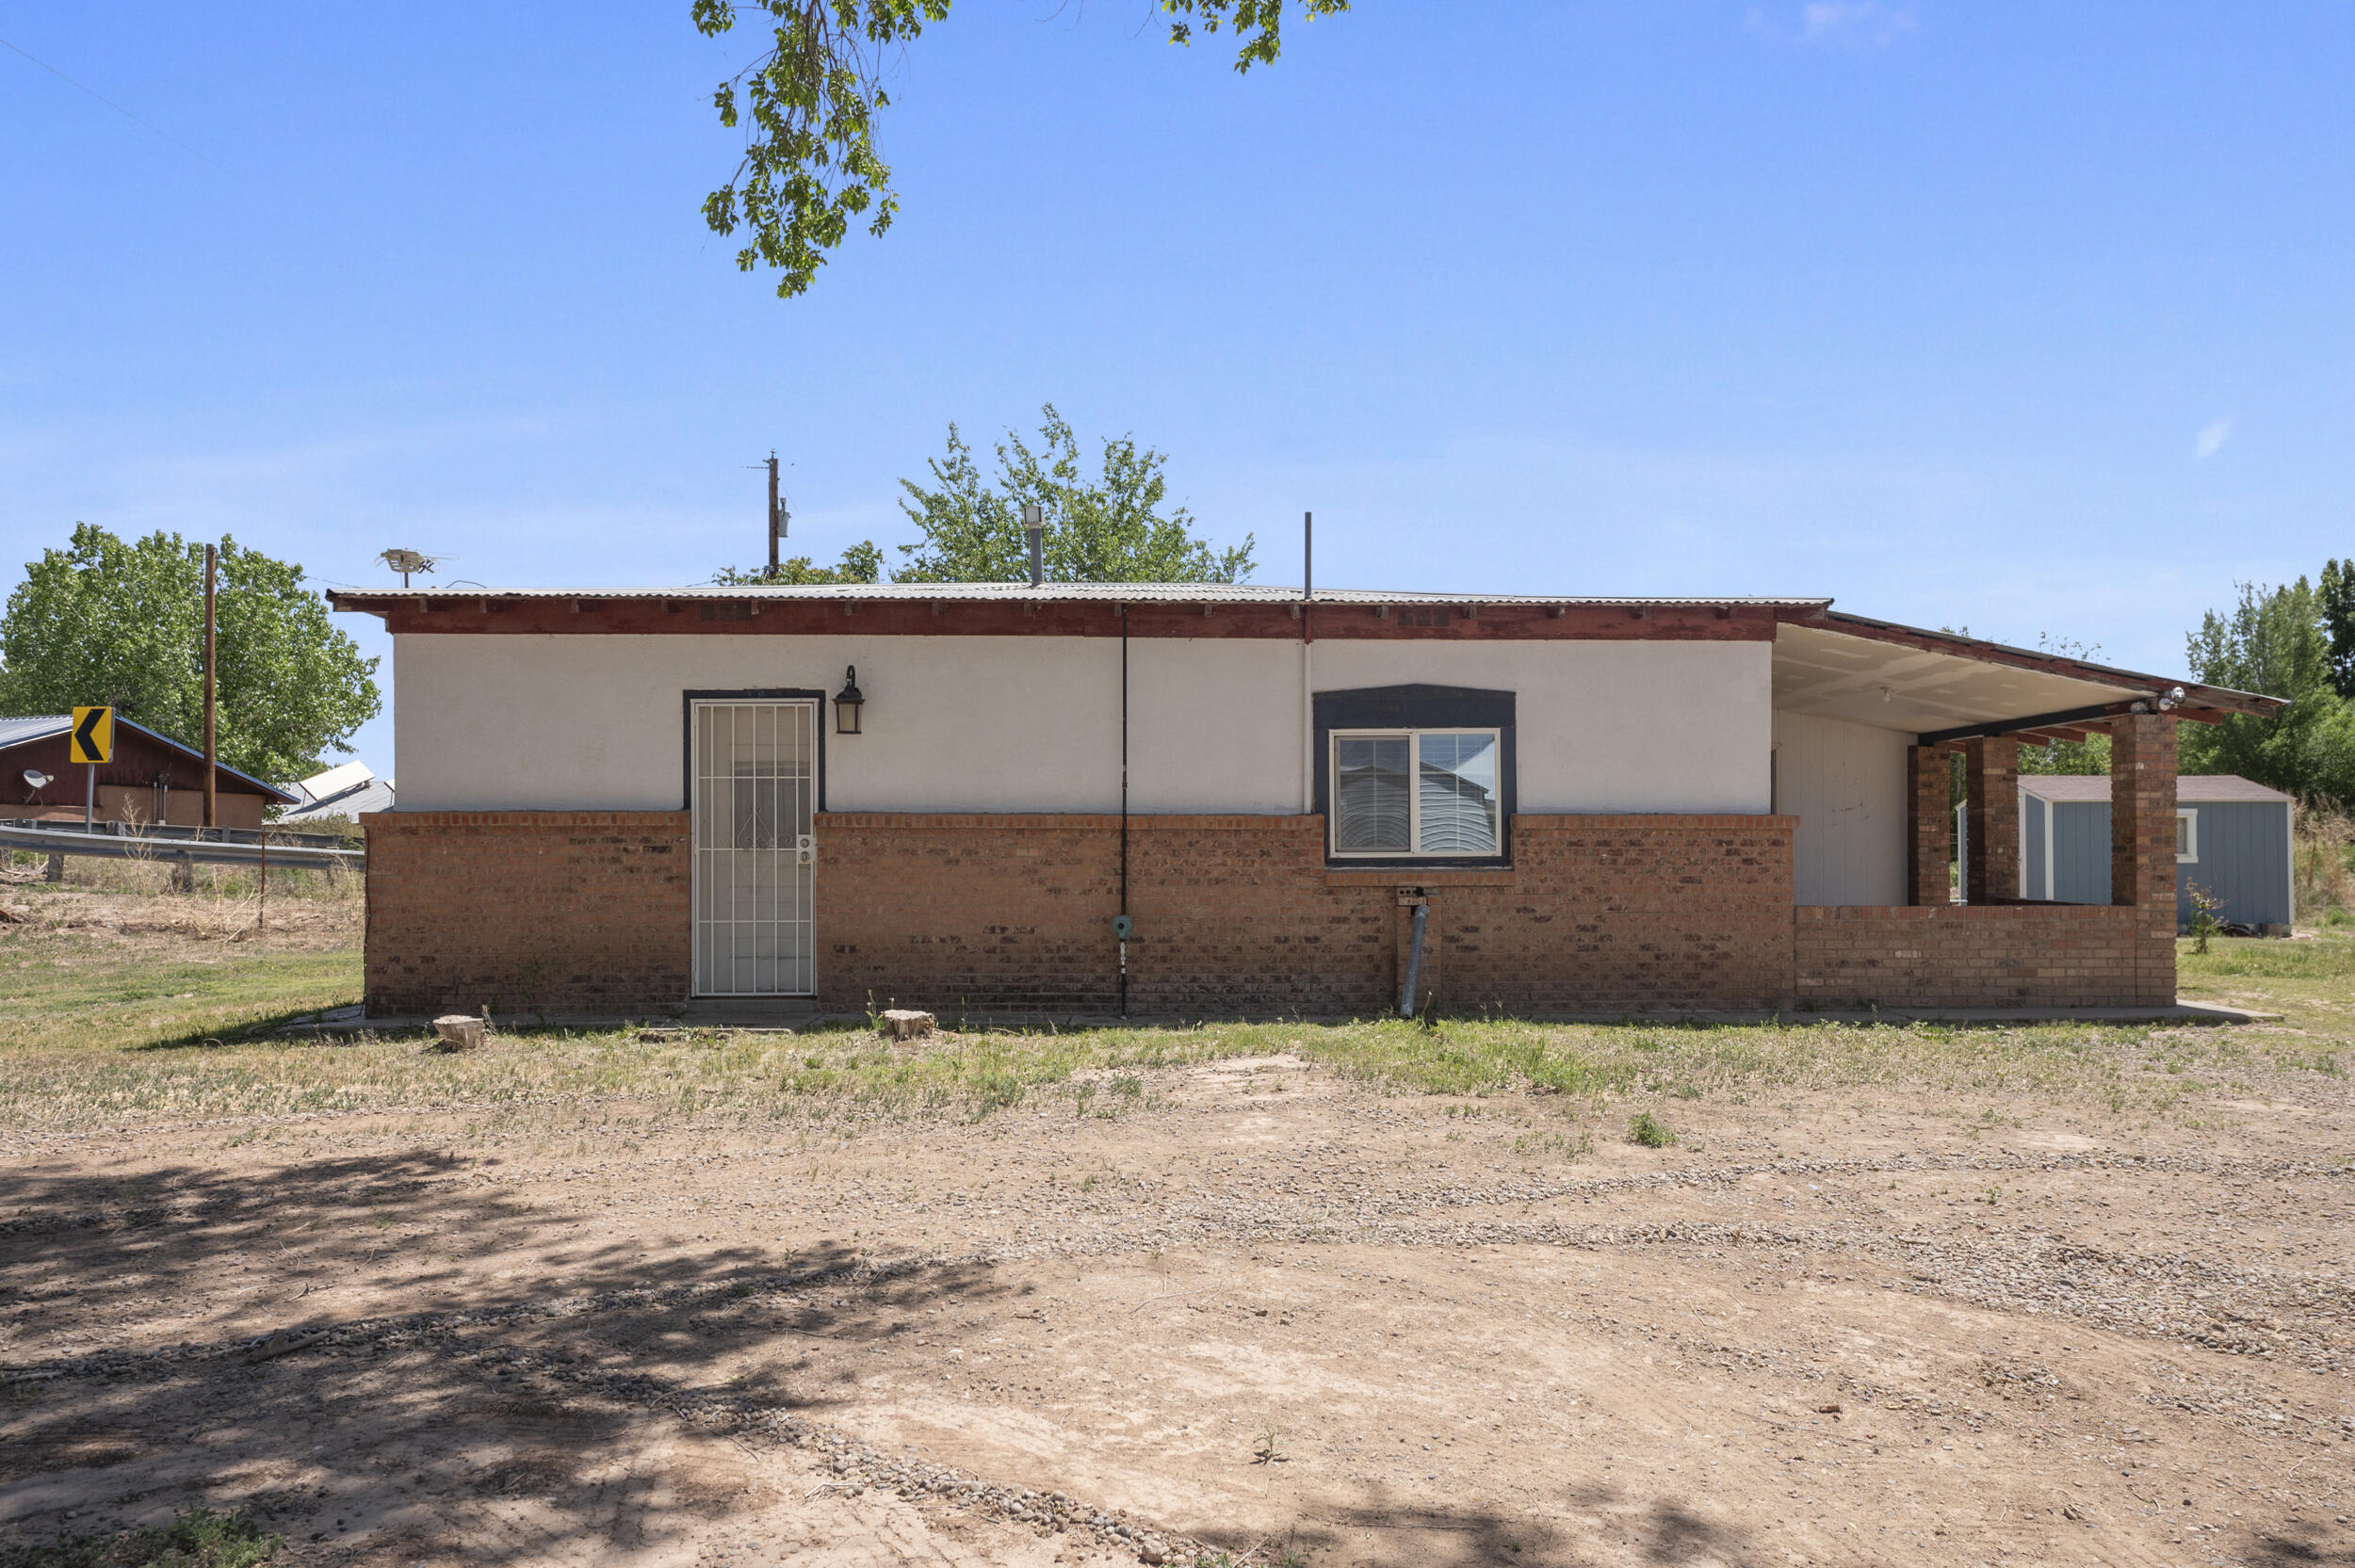 Take a look at this quaint adobe home on almost an acre and fully fenced in with a garden shed. It has great views all around and is nestled in a farming community. Inside you will find tile floors throughout with a recently refreshed kitchen. There are so many possibilities for this property. This home is waiting for you to call your own!